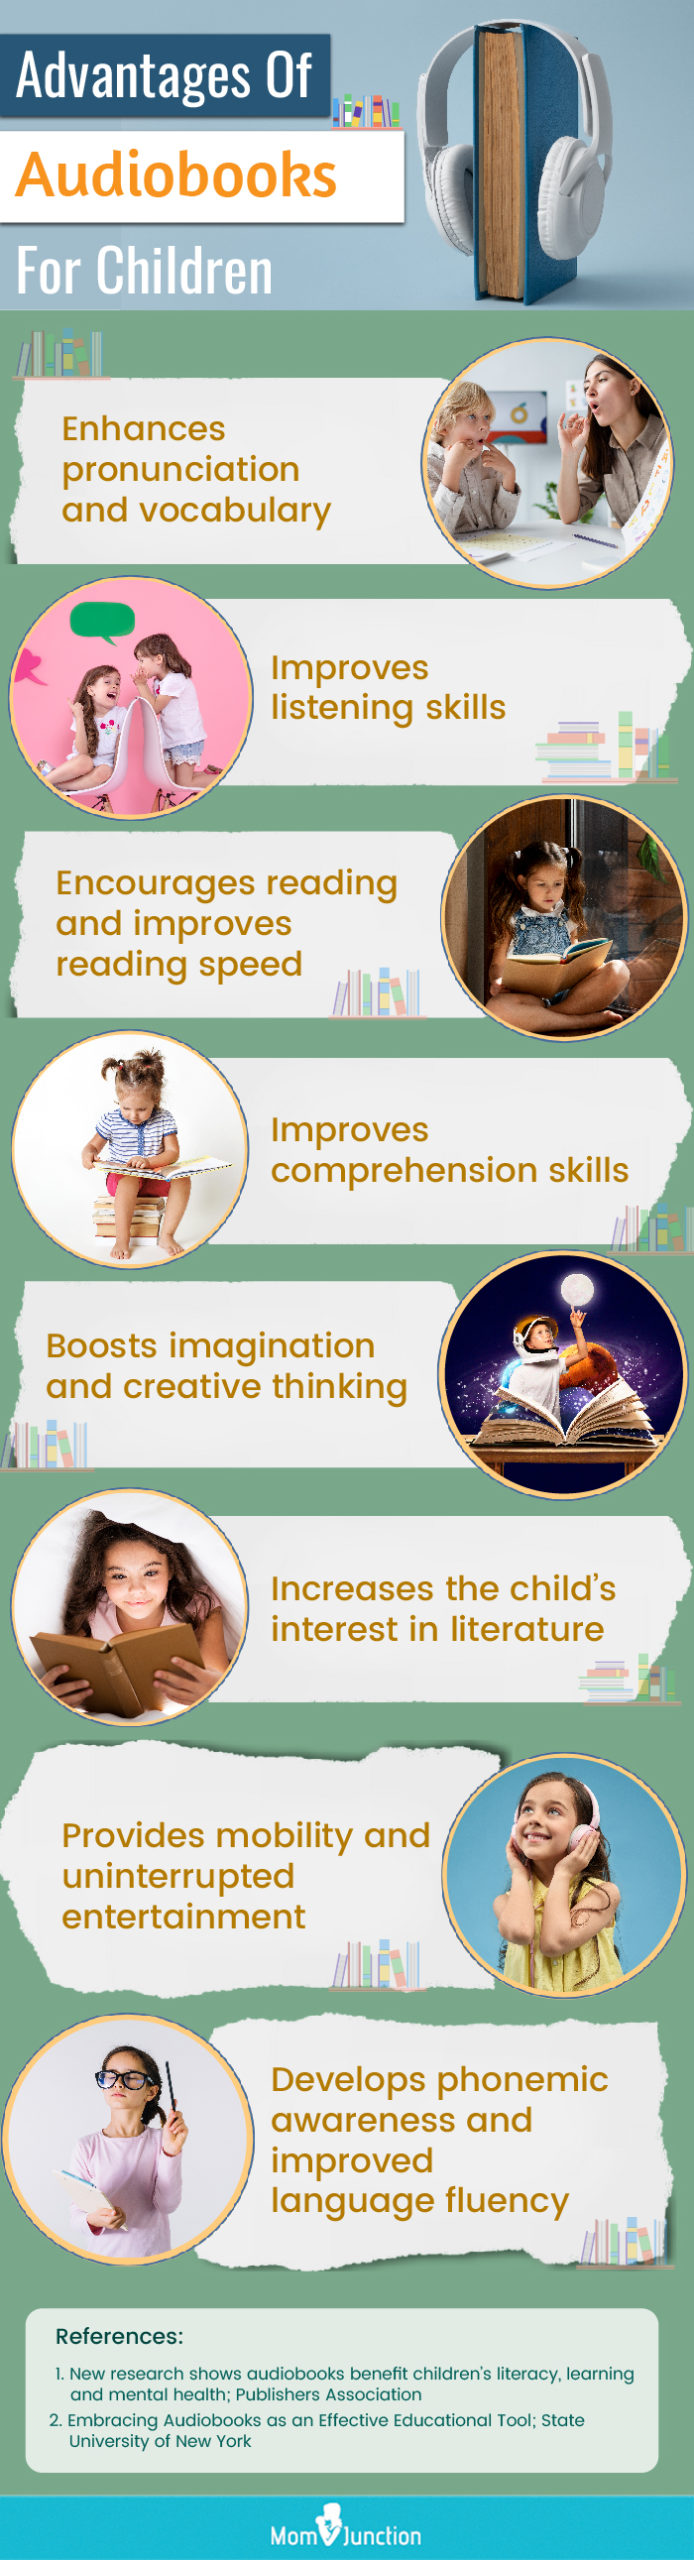 Advantages Of Audiobooks For Children (infographic)